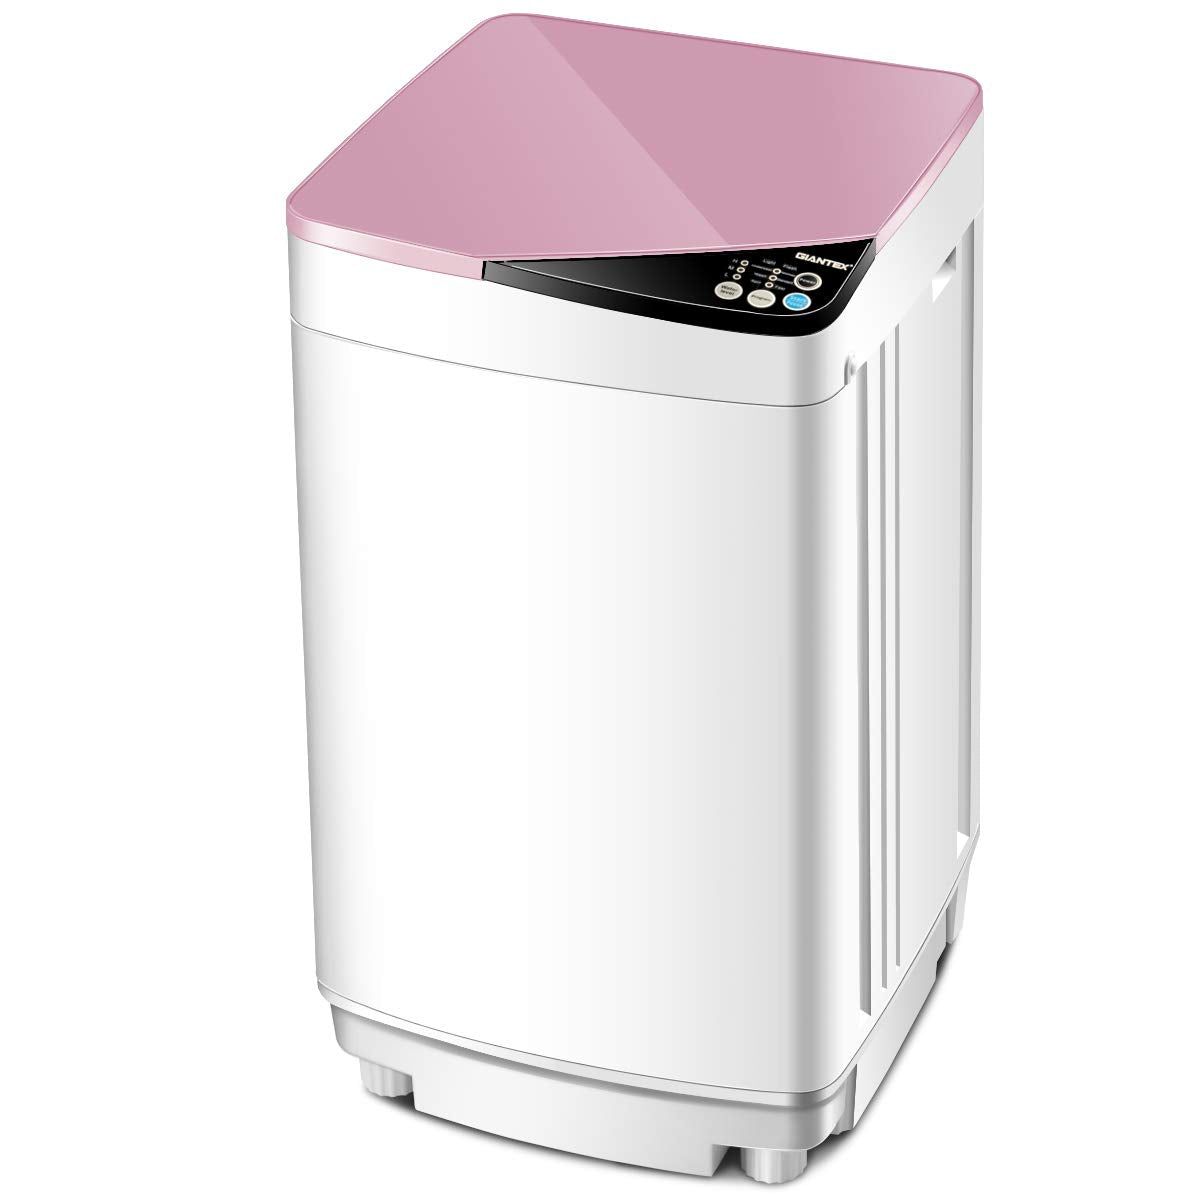 Costway Portable Full-Automatic Laundry Washing Machine 8.8lbs Spin Washer  W/ Drain Pump 